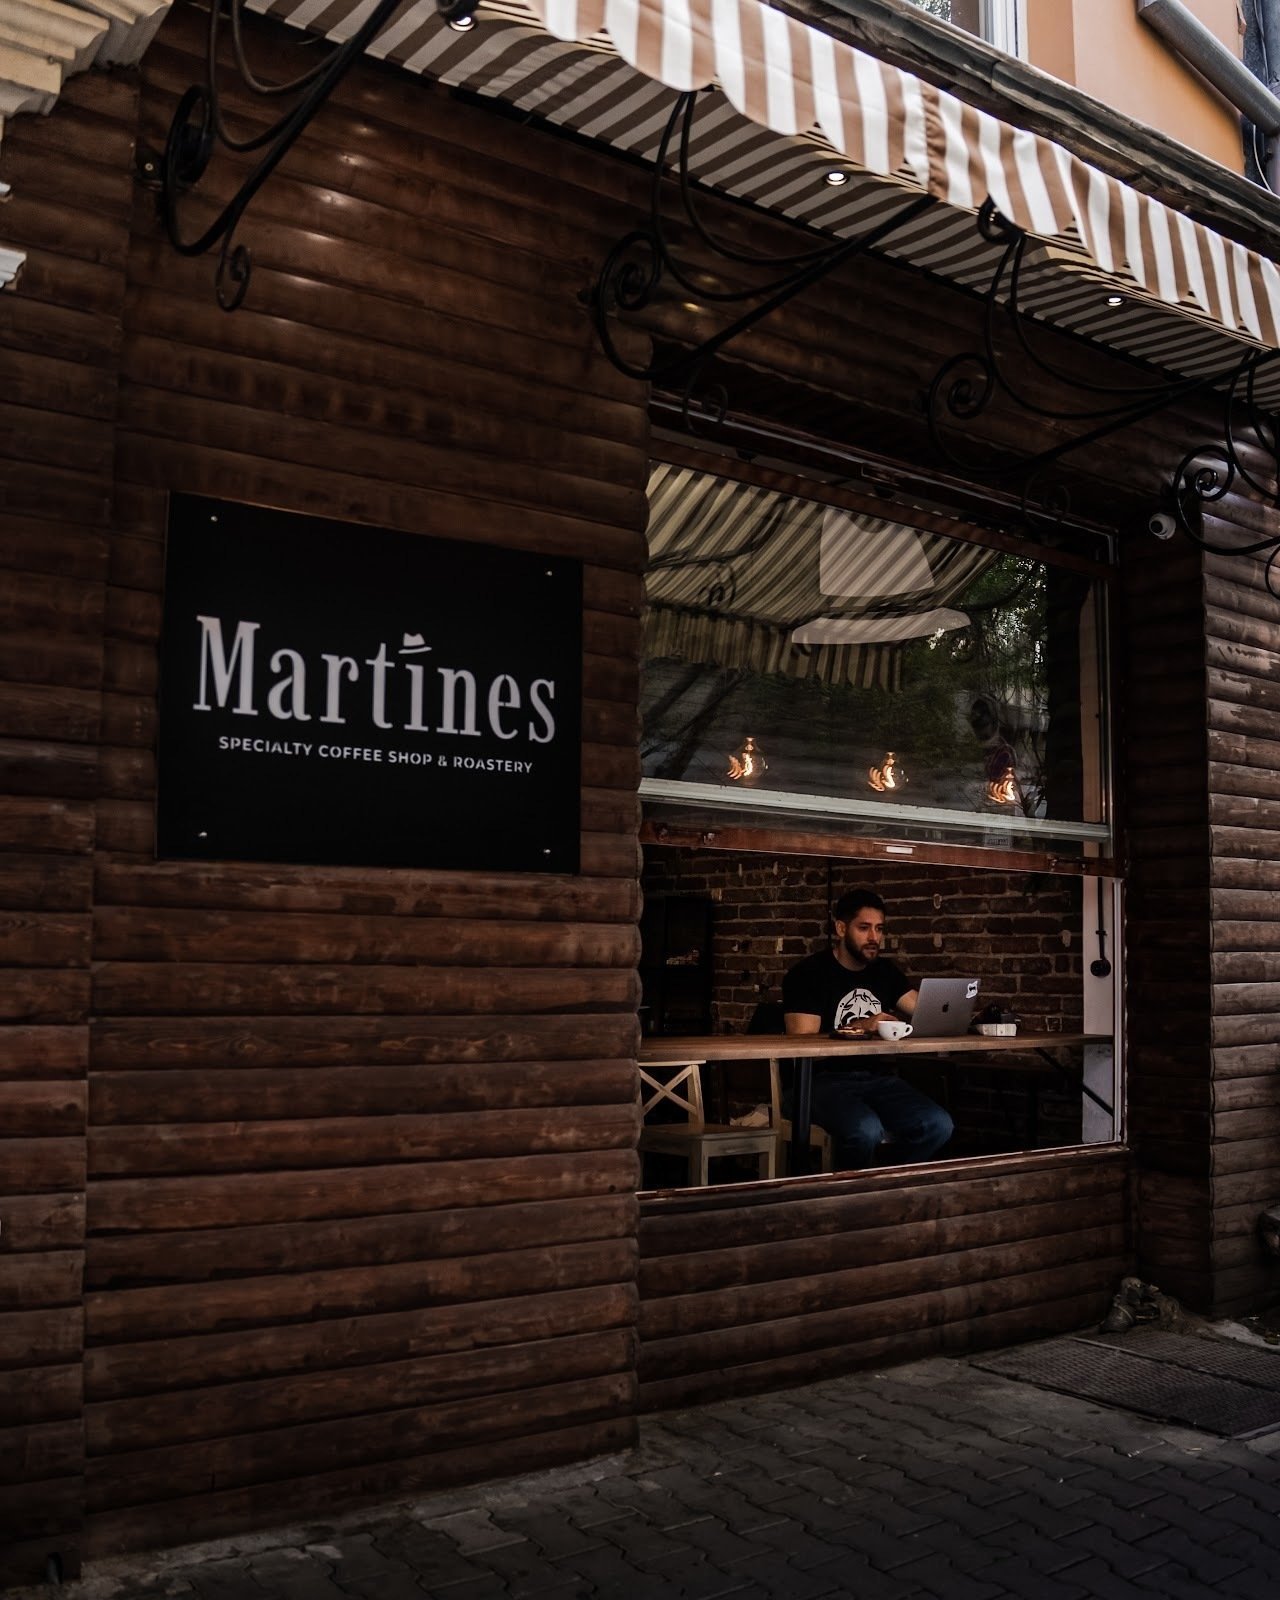 <span class="translation_missing" title="translation missing: en.meta.location_title, location_name: Martines Specialty Coffee Shop &amp; Roastery, city: Sofia">Location Title</span>